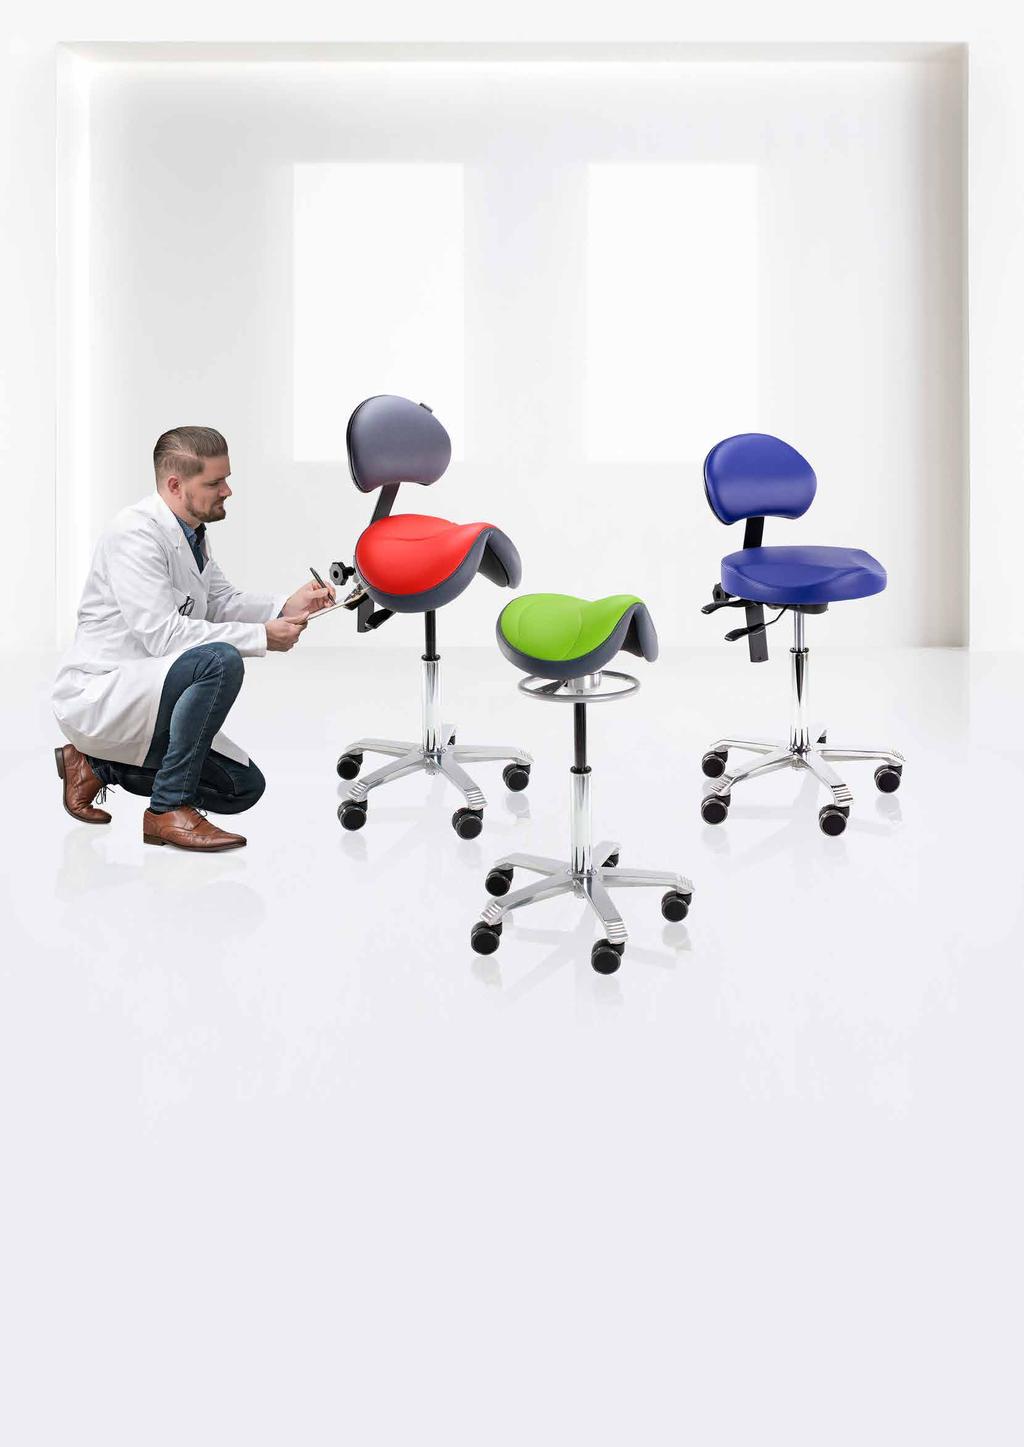 Free trial Experience the comfort of a saddle stool with a perfect fit. Request a trial now and try the saddle stool of your choice in your practice for two weeks without any obligation. Interested?